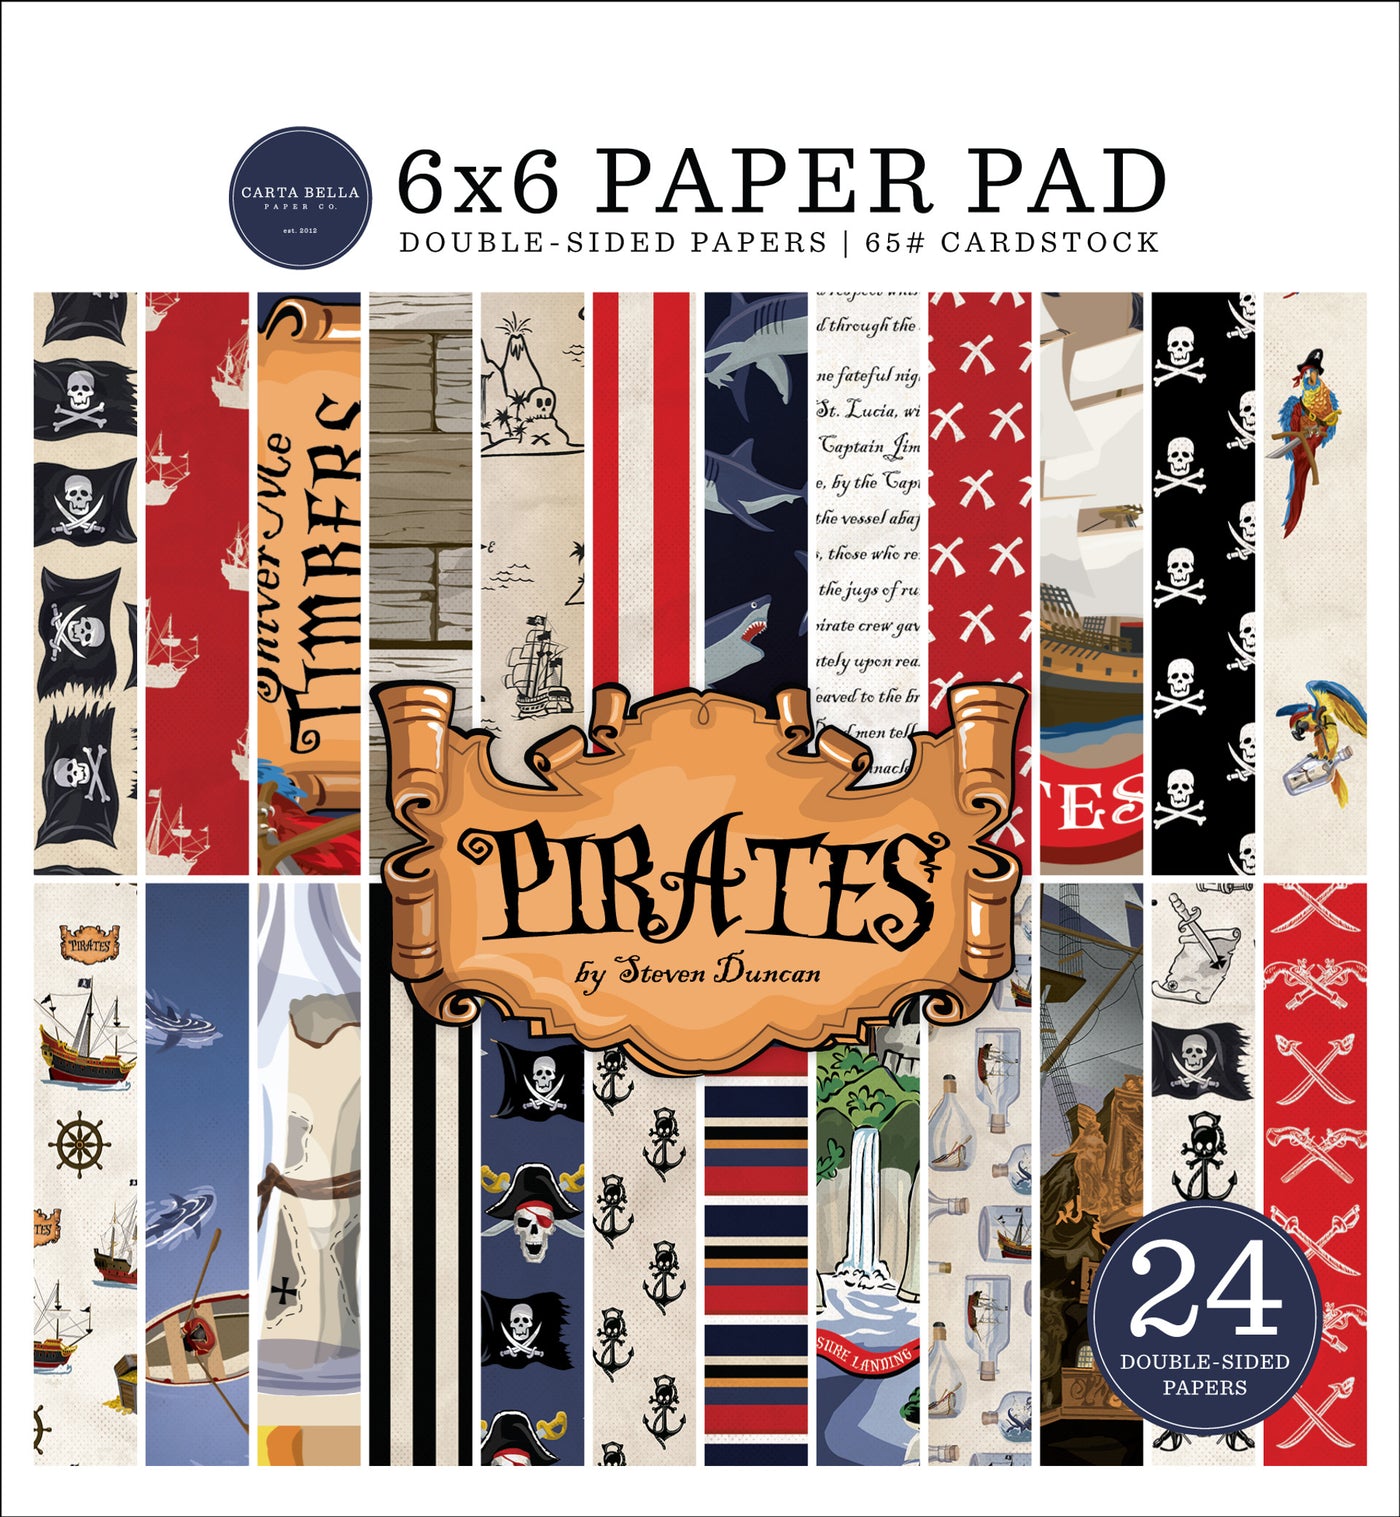 Versatile 6x6 pad with 24 double-sided sheets. Great for card making and pages. Tell the story of your pirate adventures. From Carta Bella Paper Co.